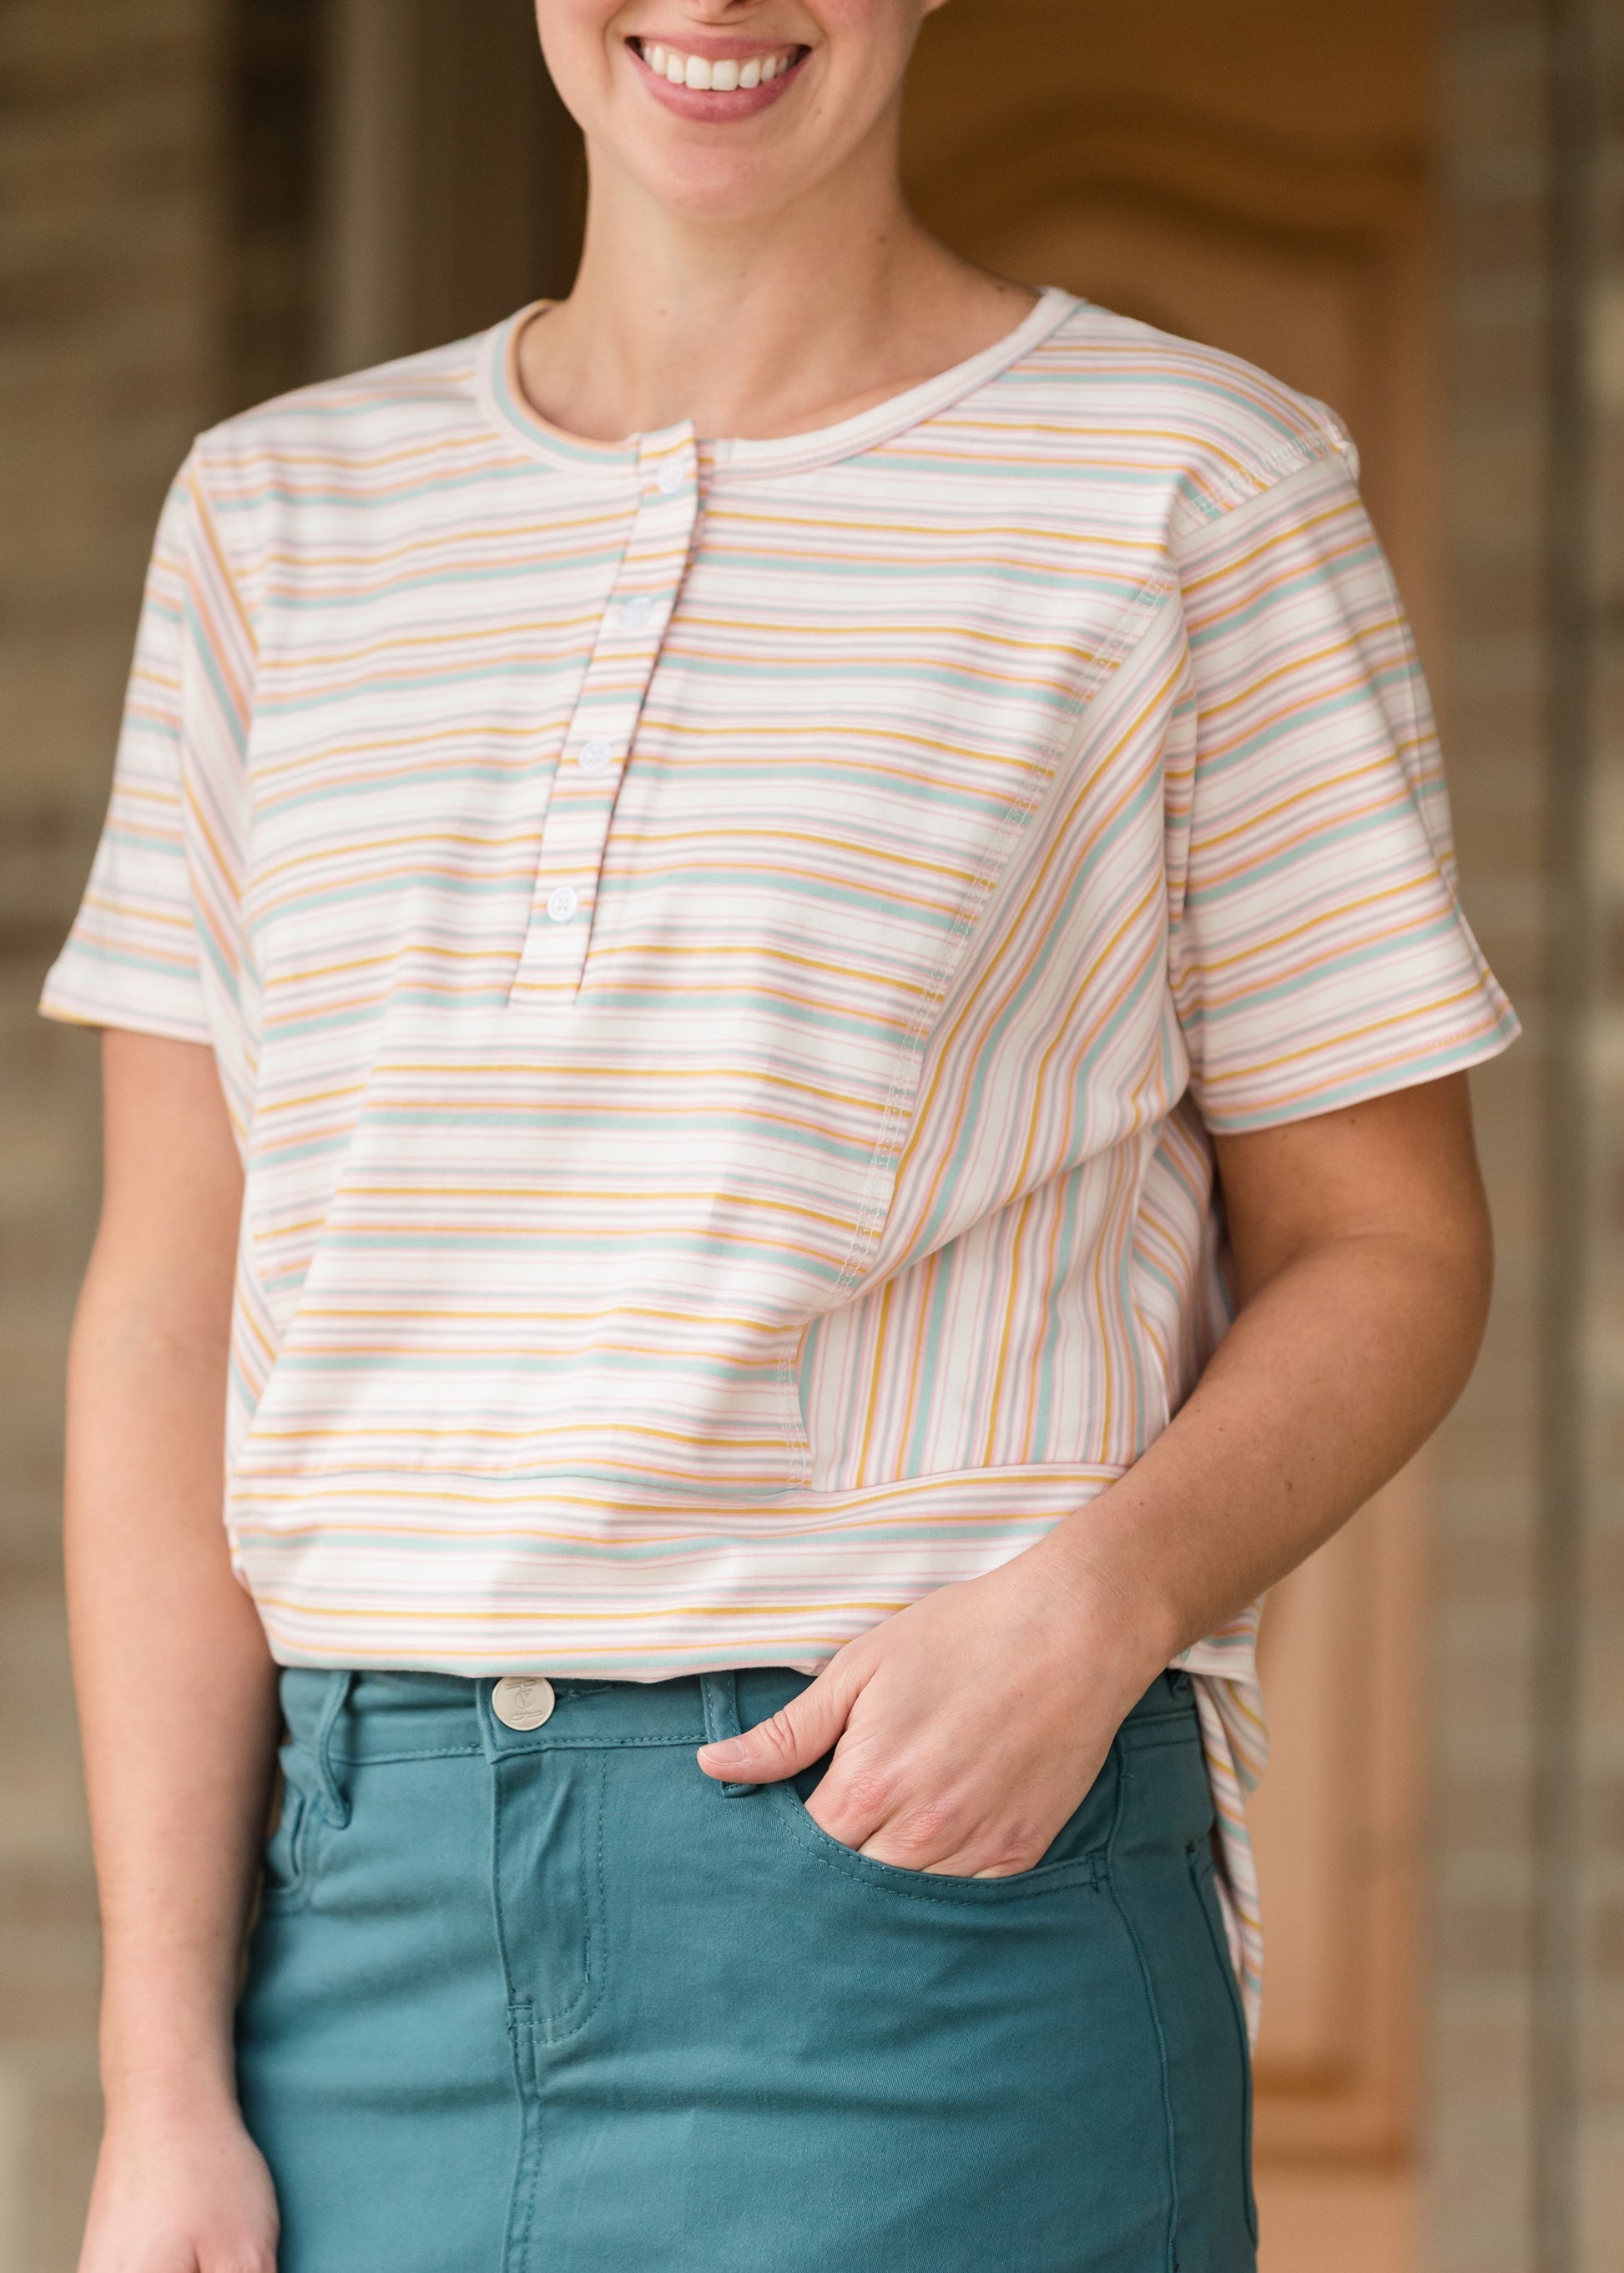 Multi Striped Button Up Tee - FINAL SALE Tops